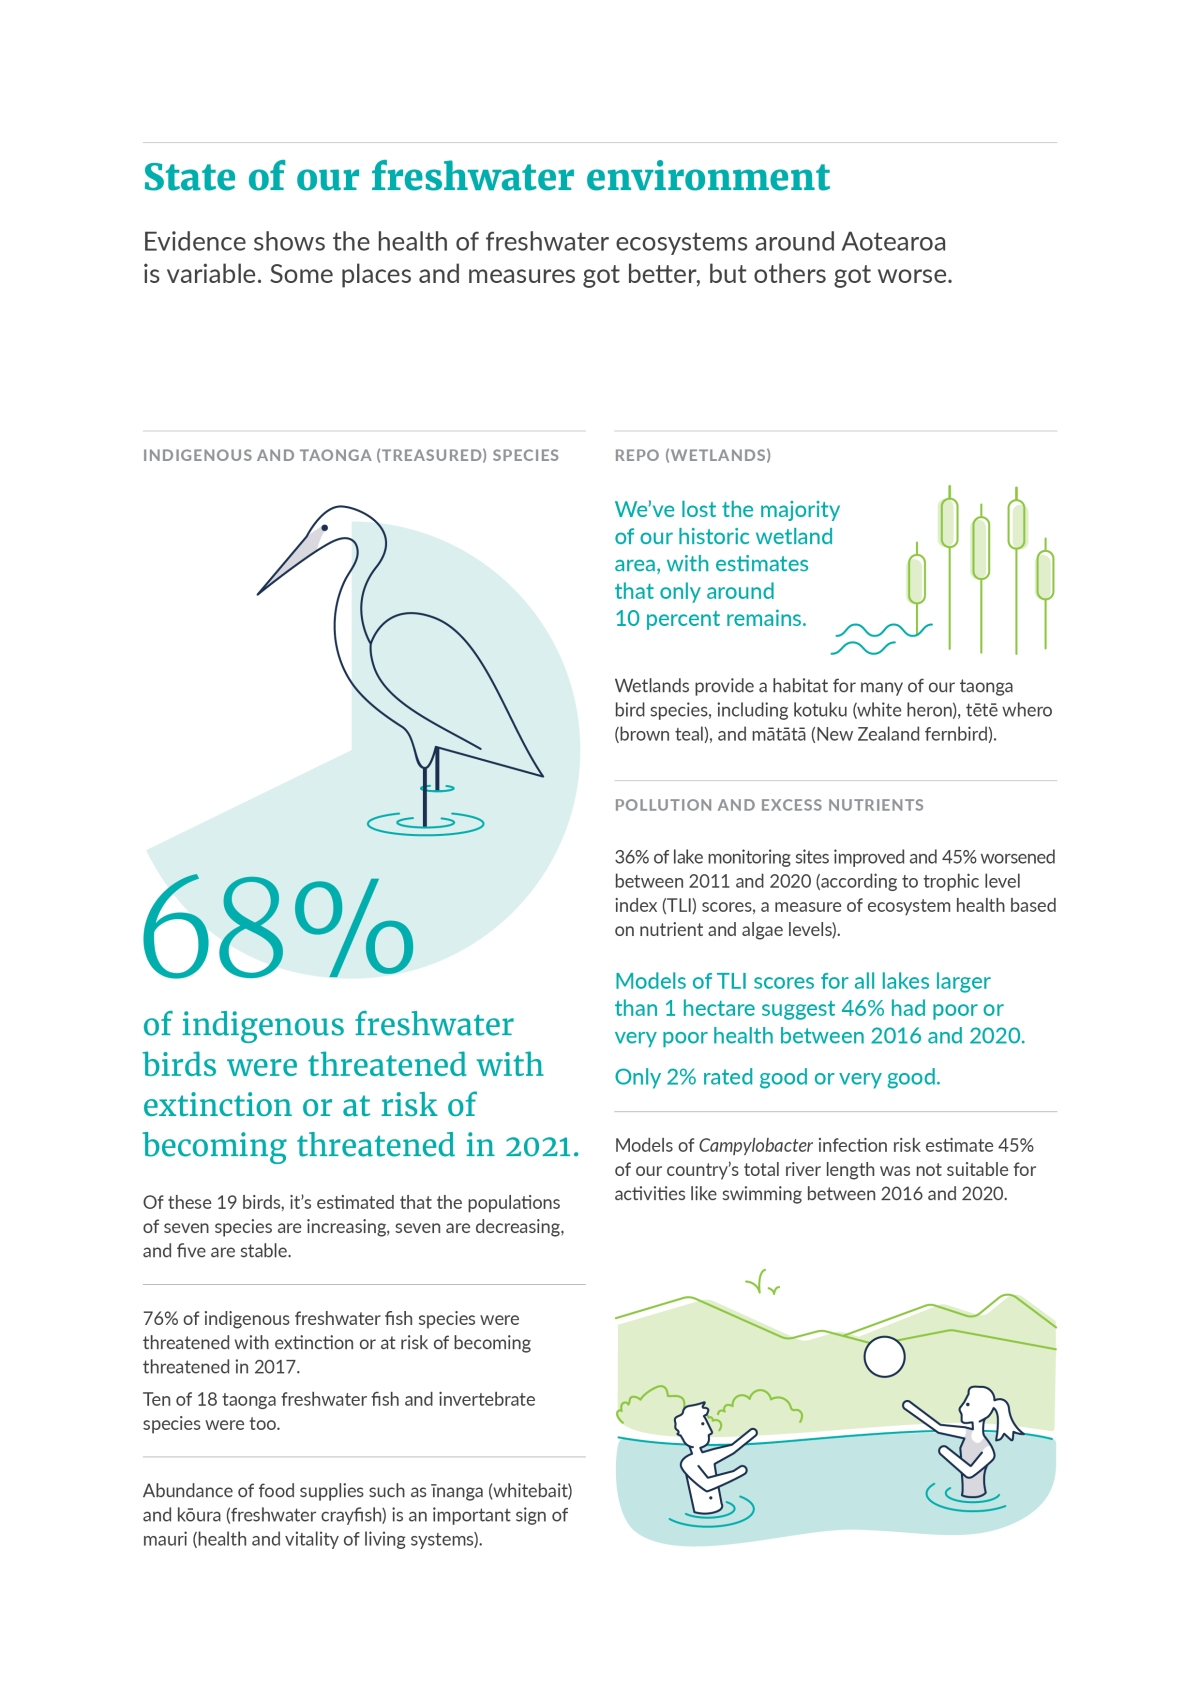 State of our freshwater environment infographic. Read the description for full text.